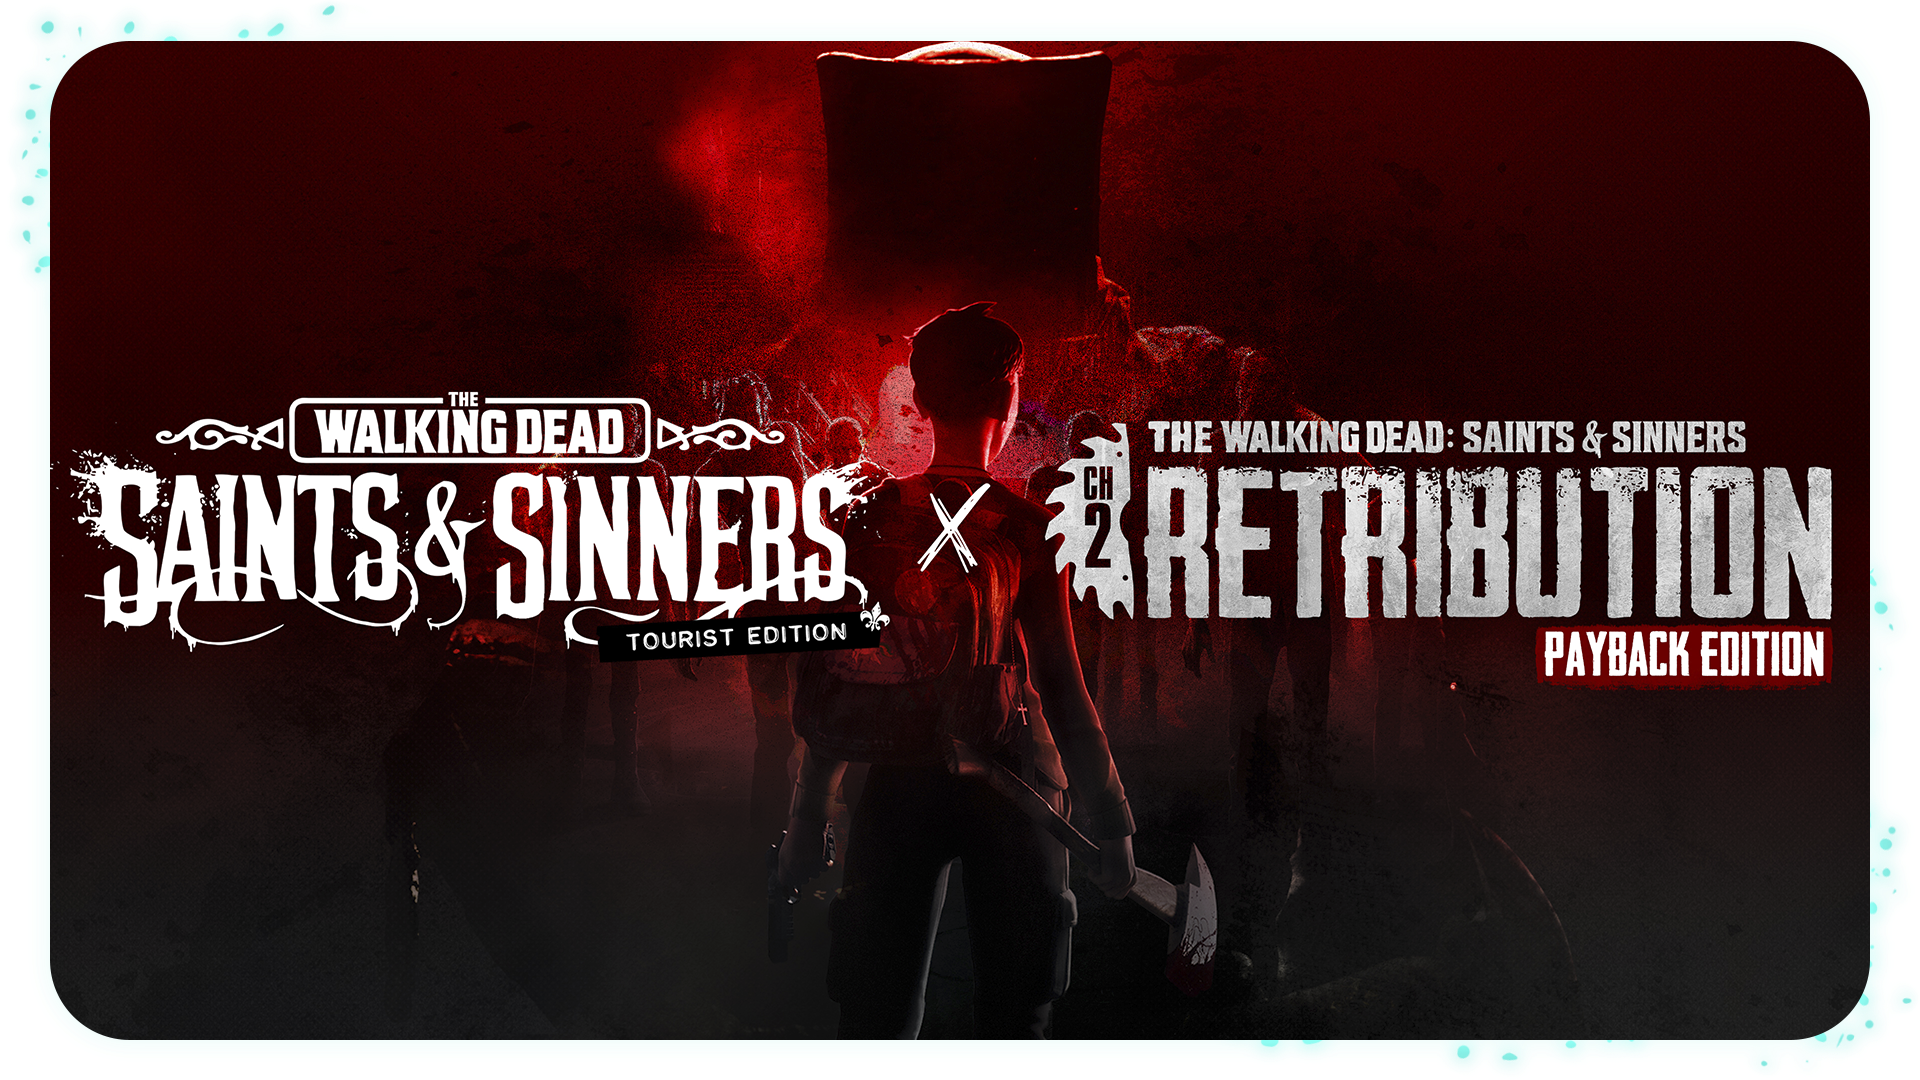 The Walking Dead: Saints and Sinners - Ch 2 Retribution - Save the City Trailer | PS VR2 Games